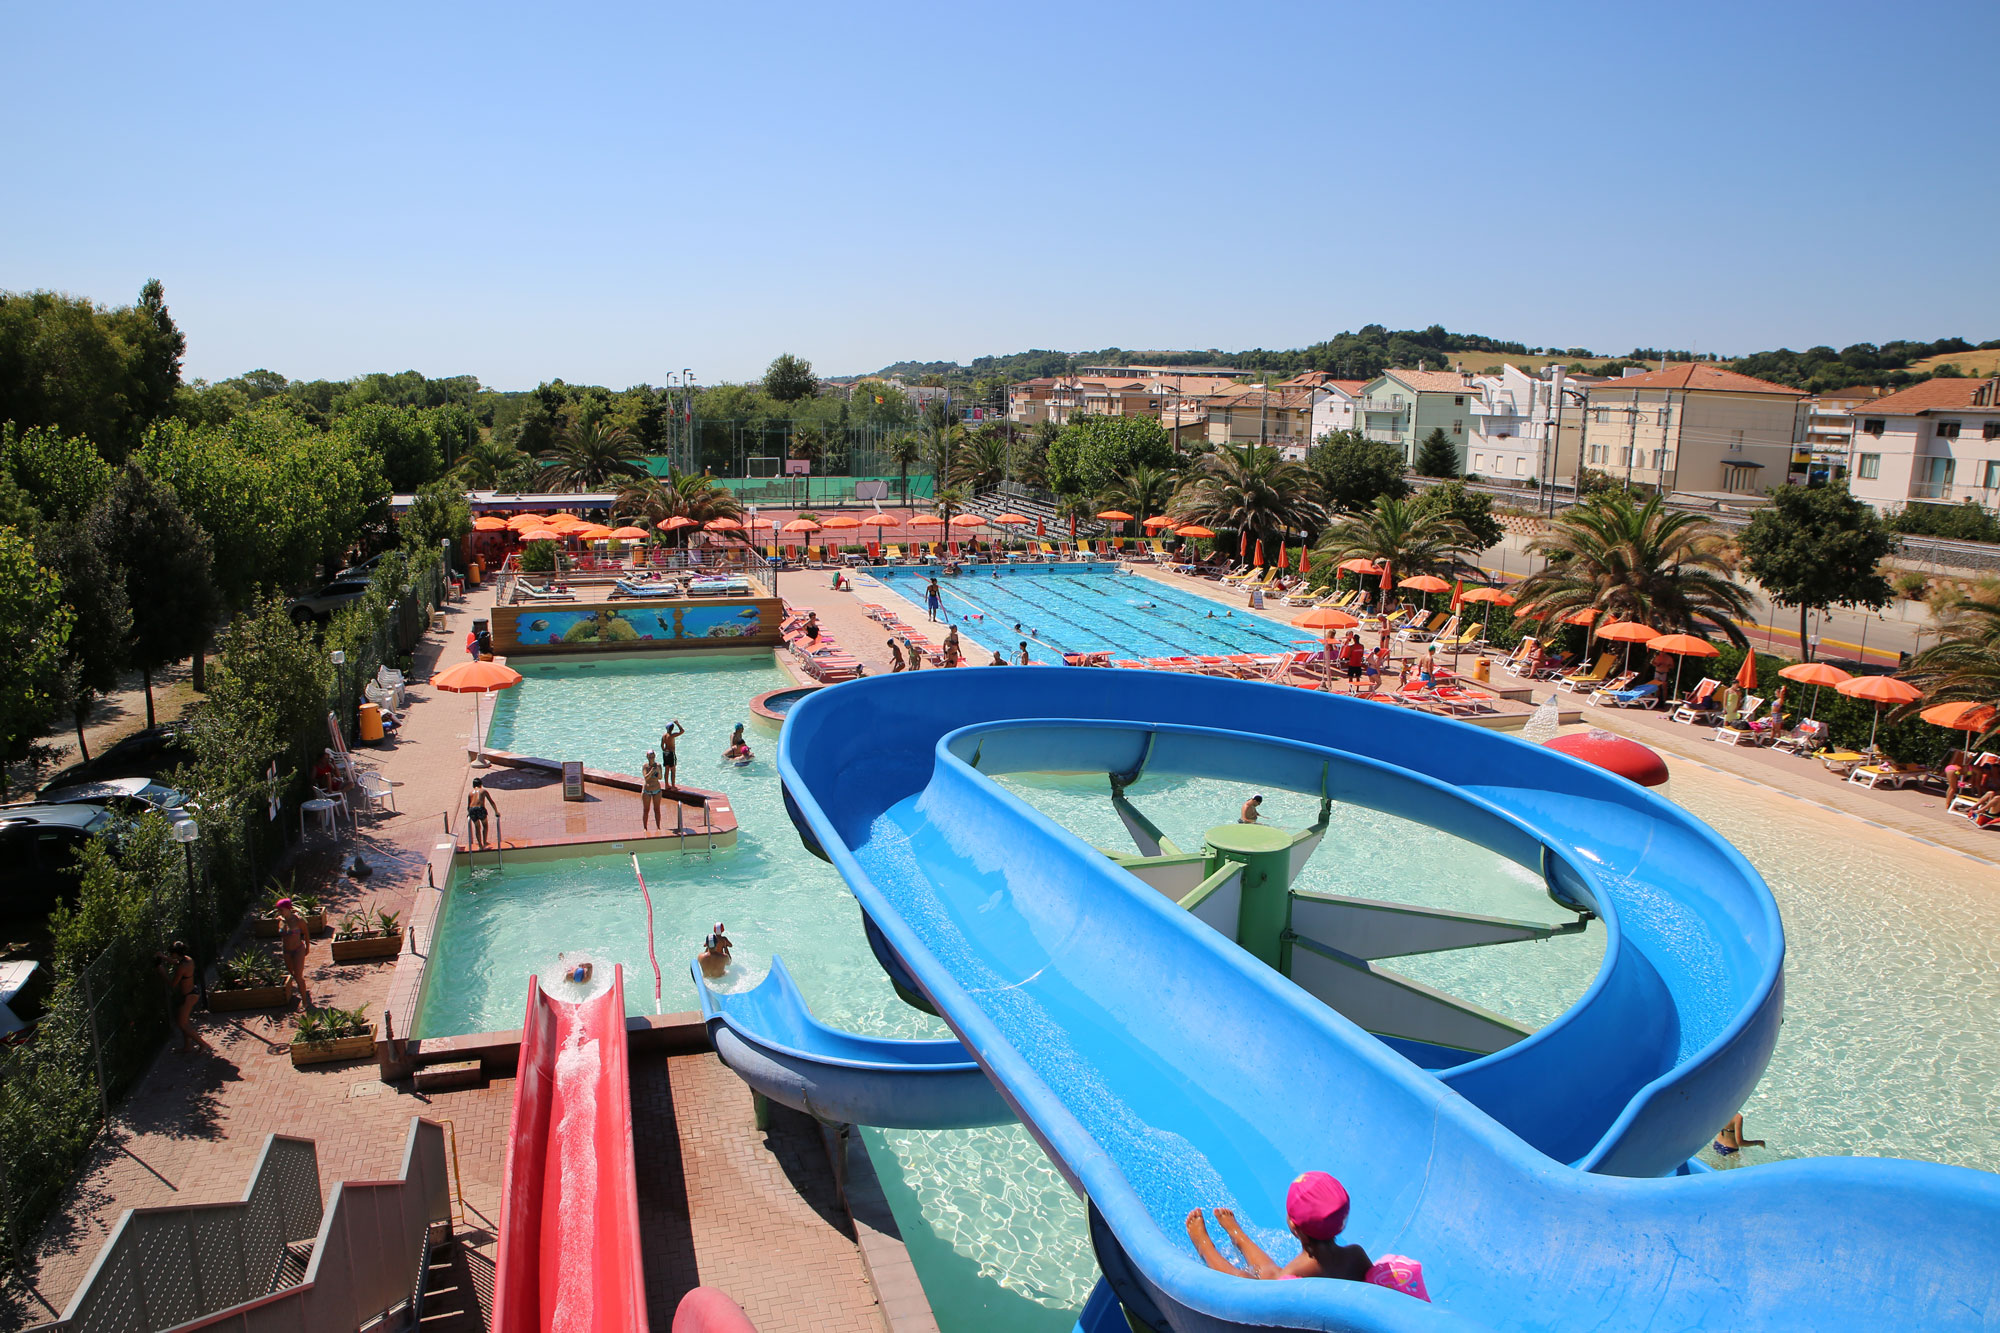 All the information you need about La Risacca Family Camping Village